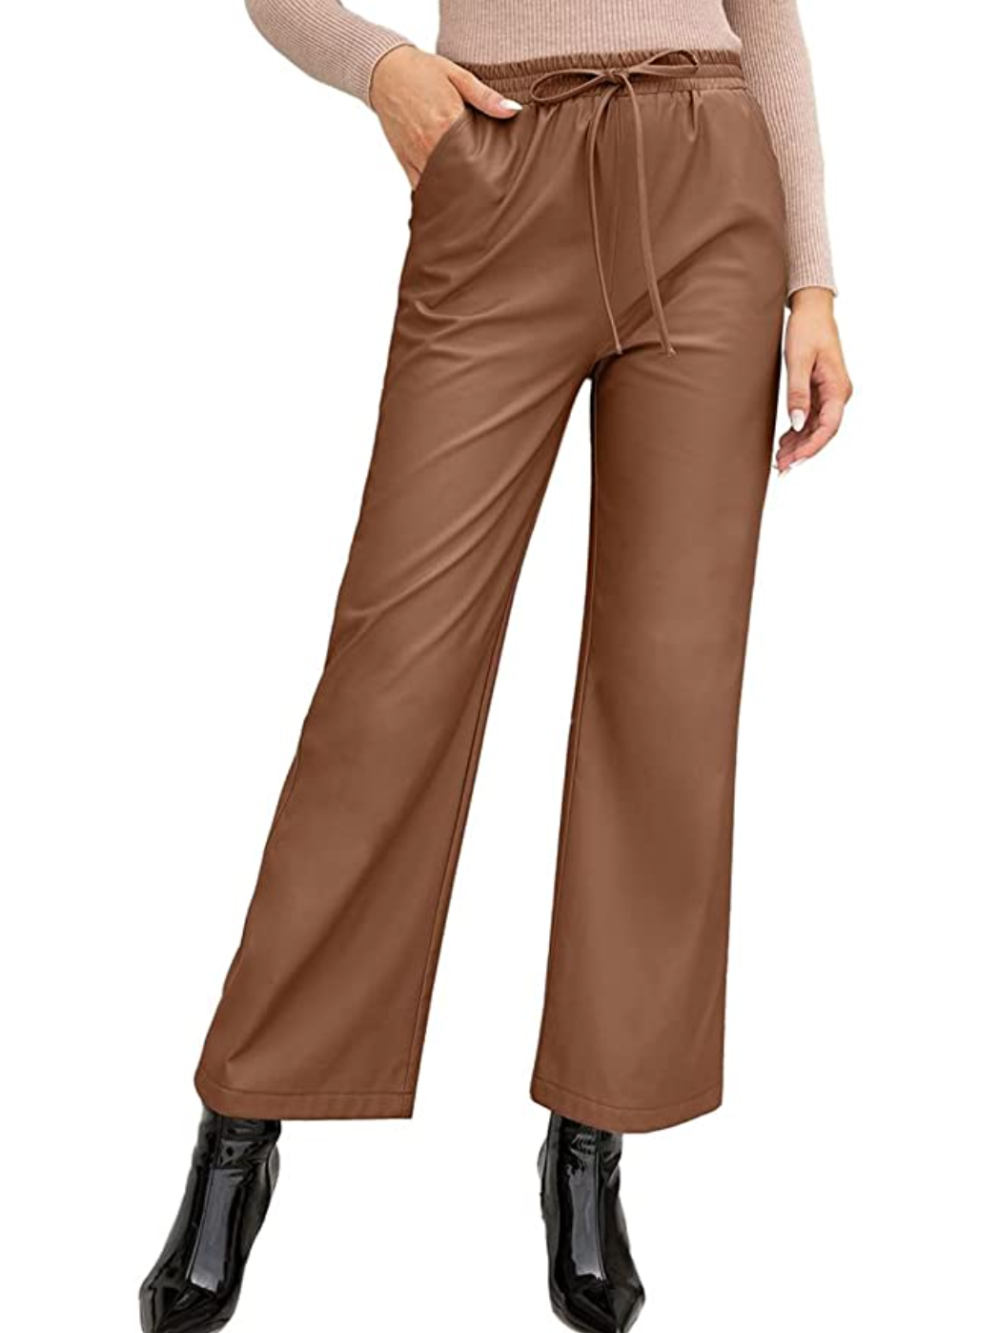 TAMEYA Women's High Waisted Straight Wide Leg Faux Leather Pants